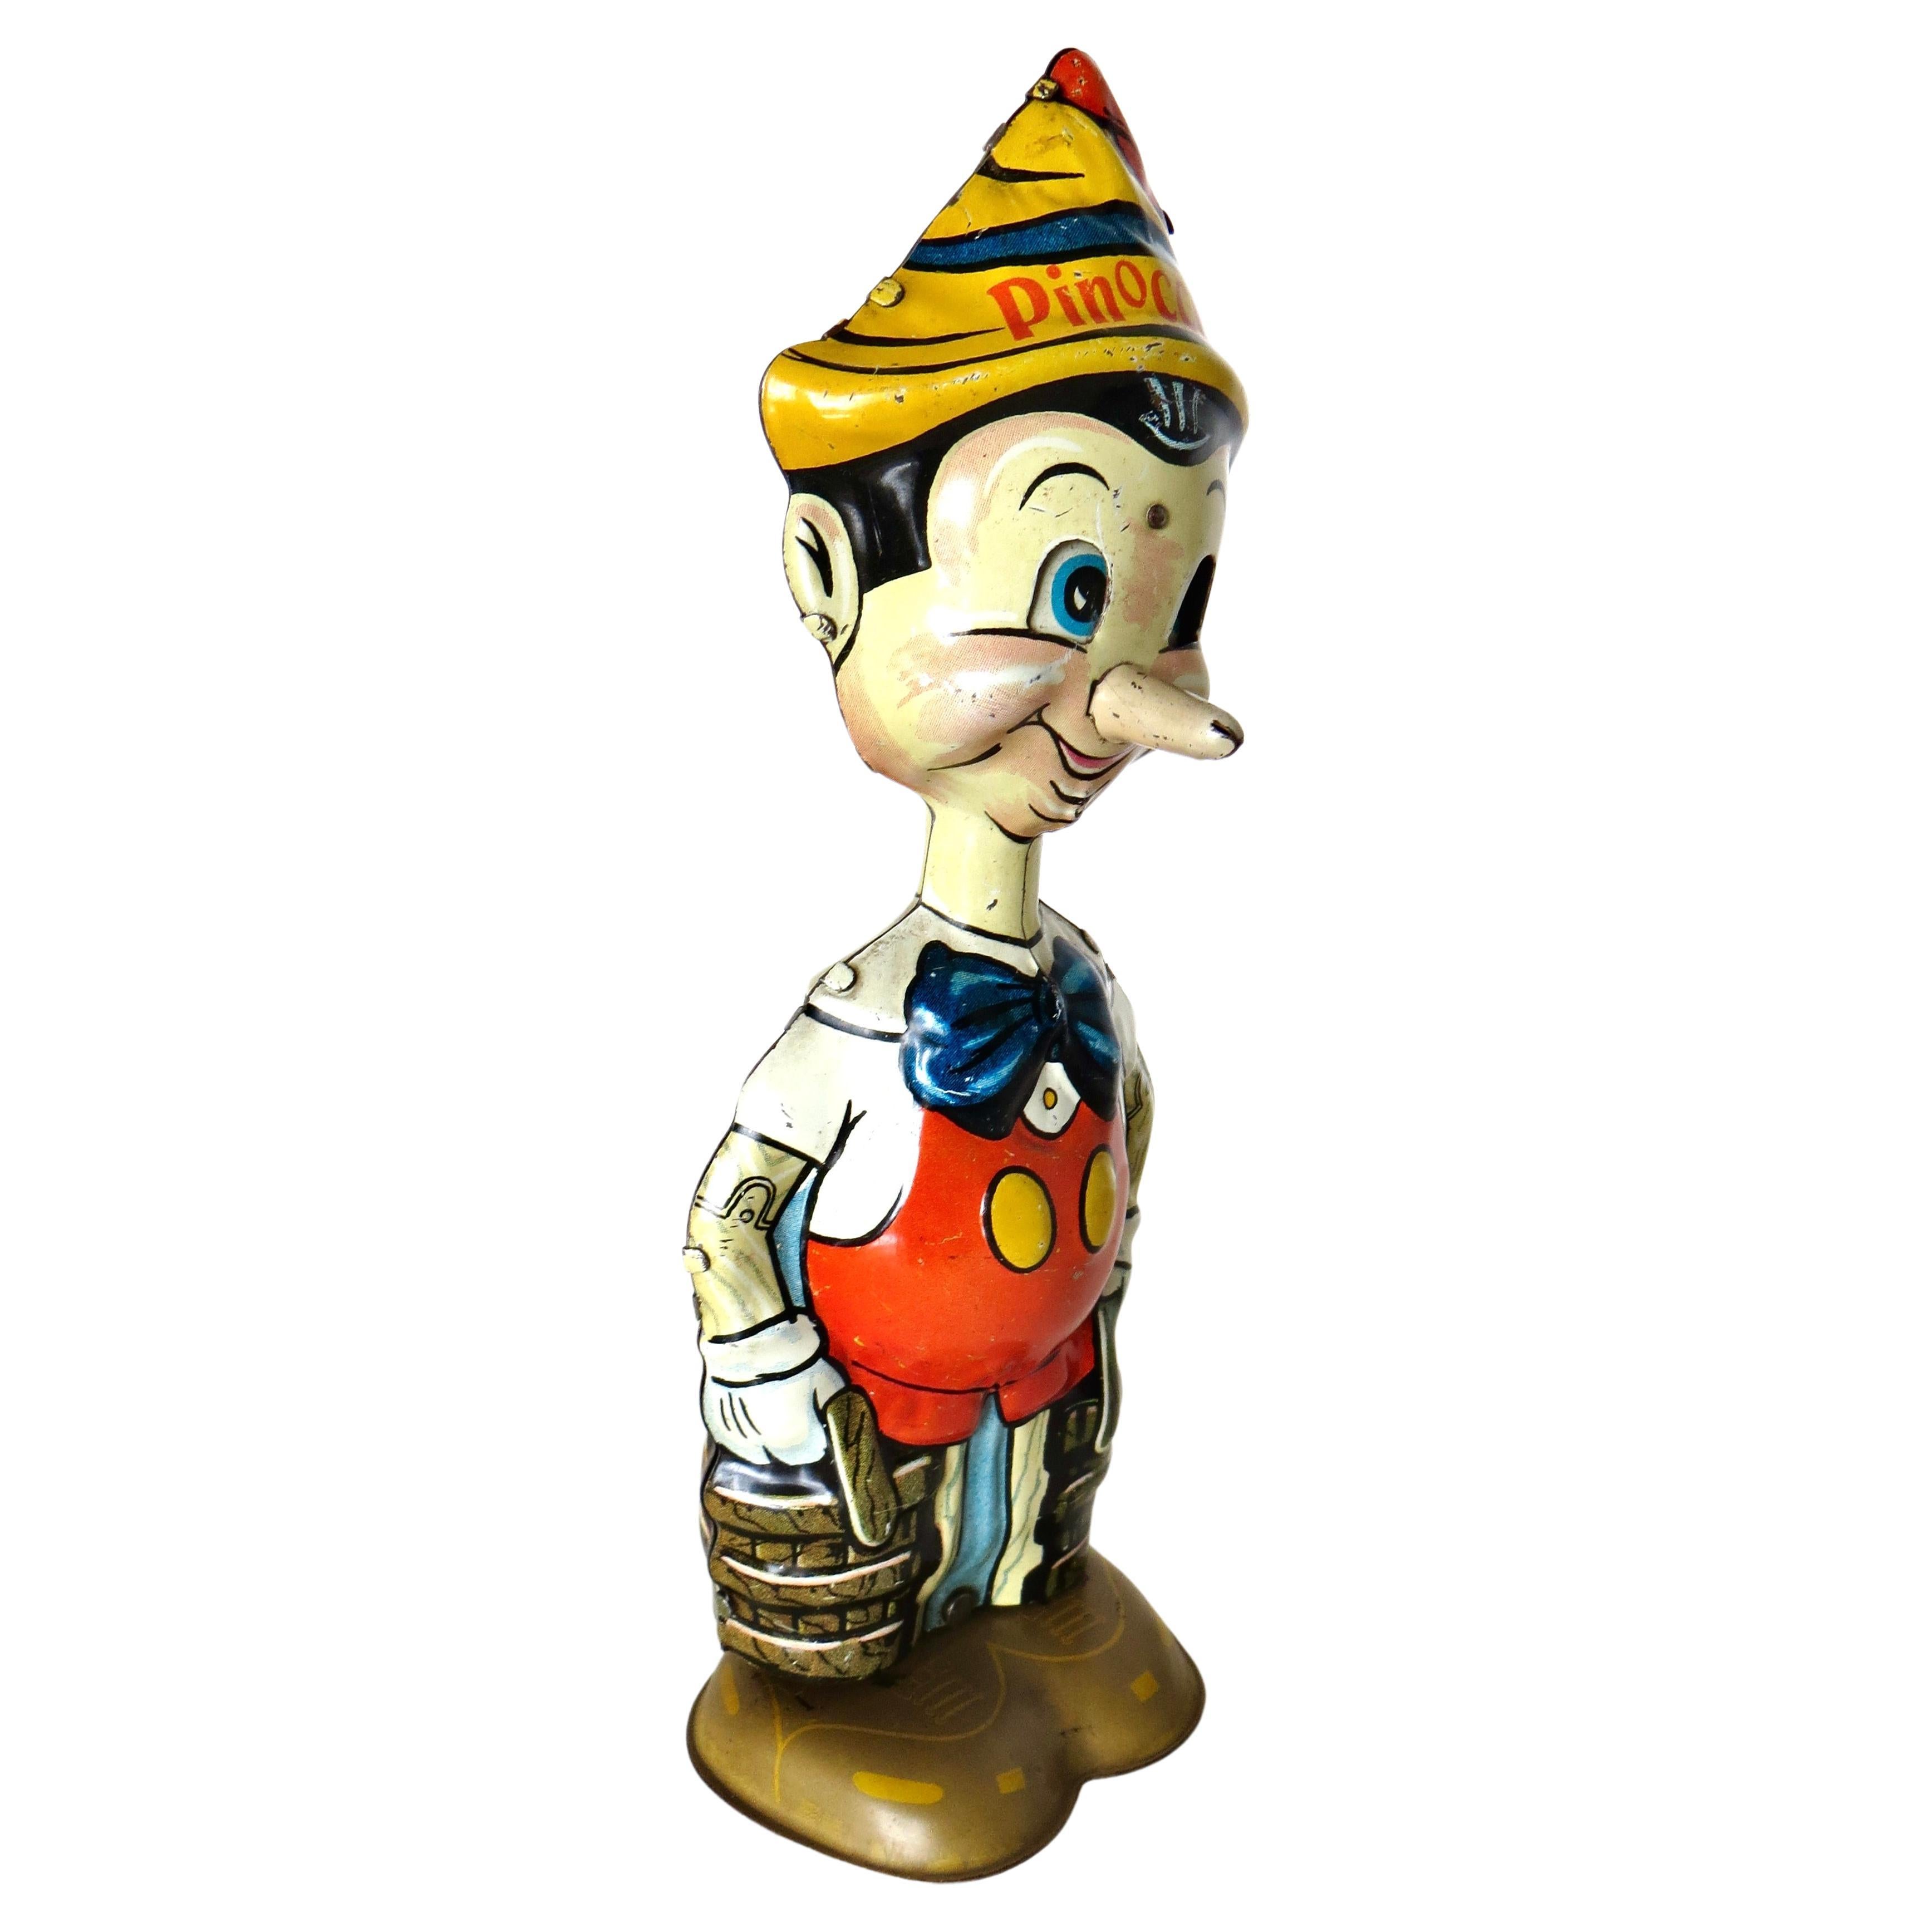 Walt Disney Enterprises "Pinocchio" Wind-Up Toy by Marx Toy Co., N.Y. Dated 1939 For Sale